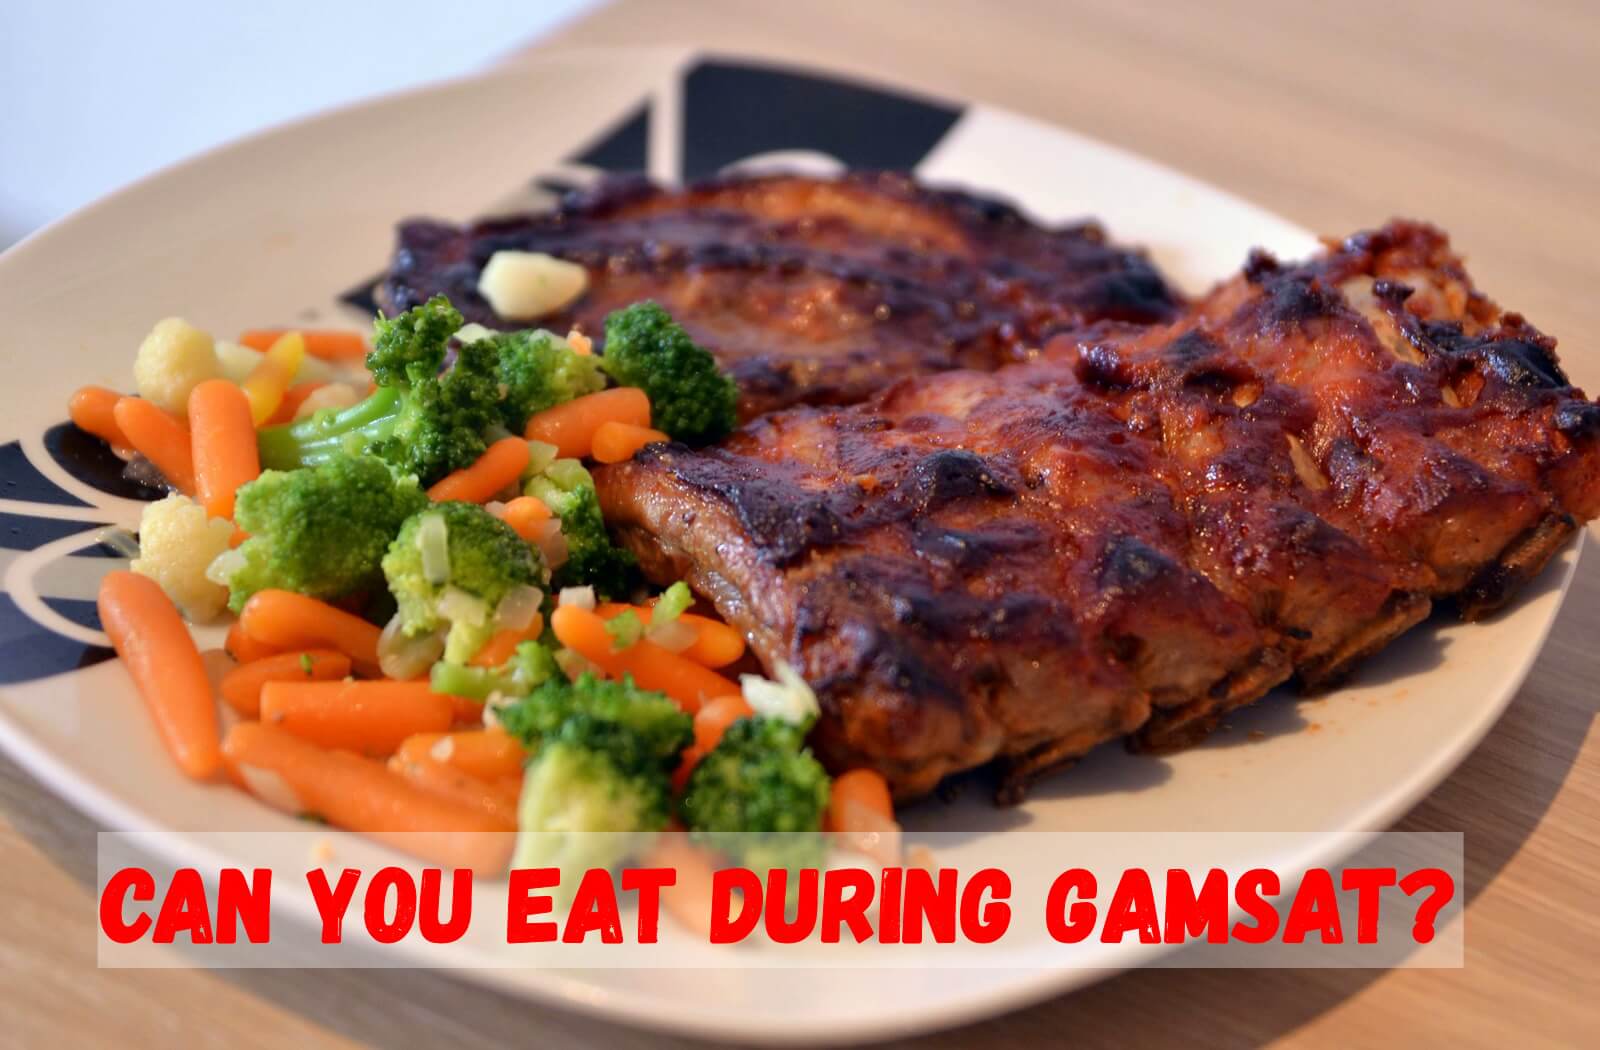 Can You Eat During Gamsat?